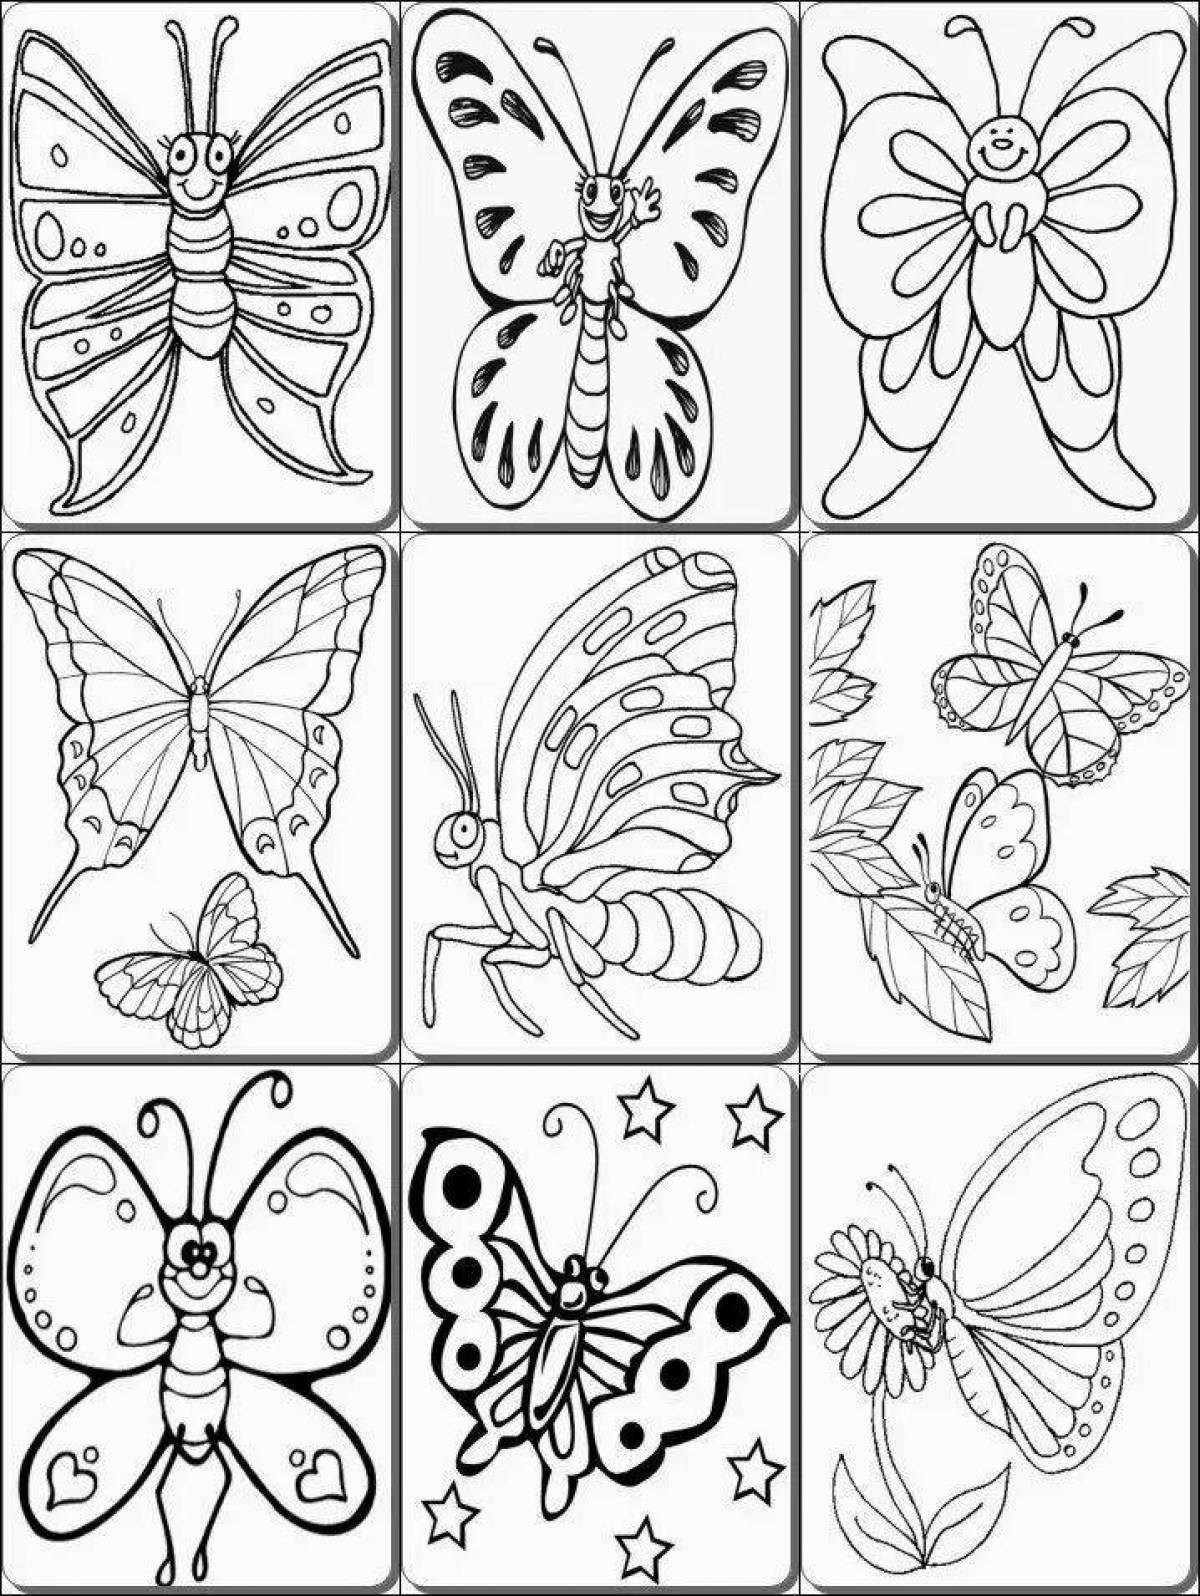 Charming coloring many on one sheet